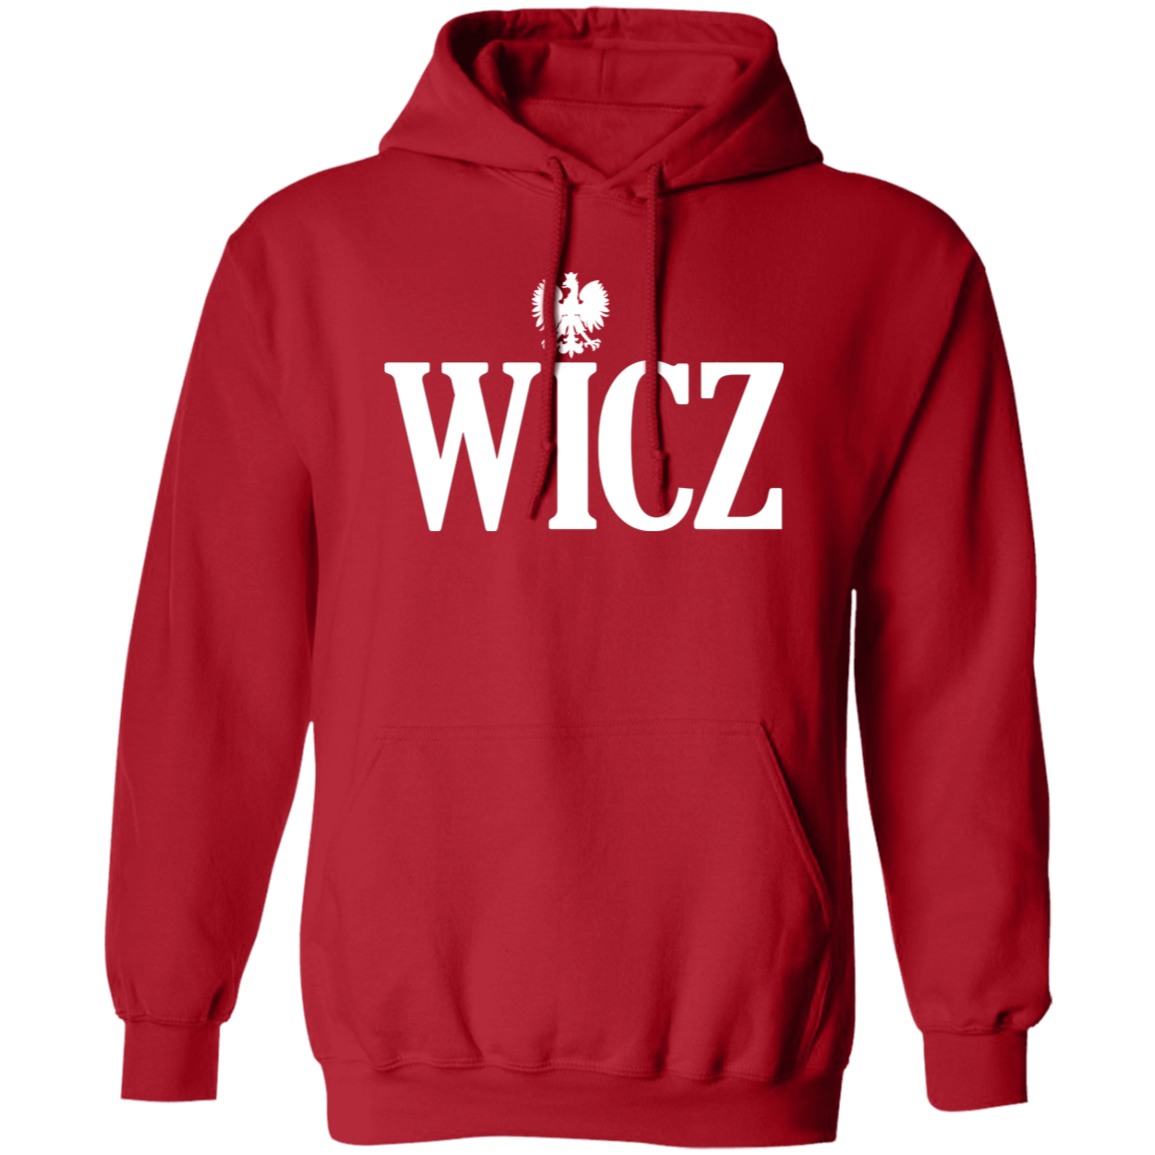 WICZ Polish Surname Ending Apparel CustomCat G185 Pullover Hoodie Red S